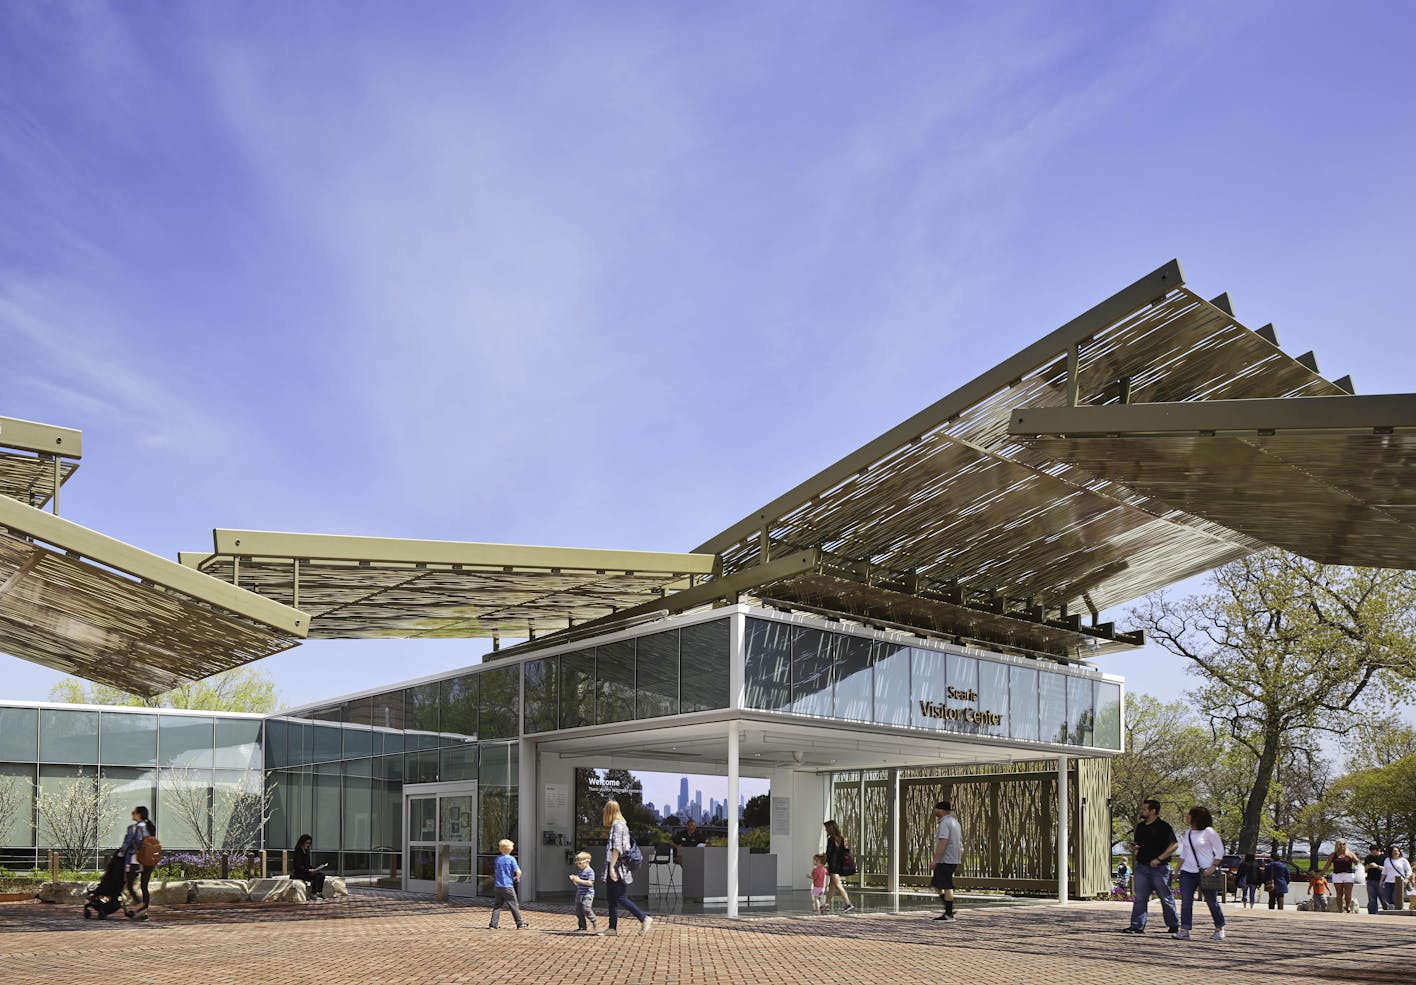 New visitor center with cantilever canopy and disappearing glass walls